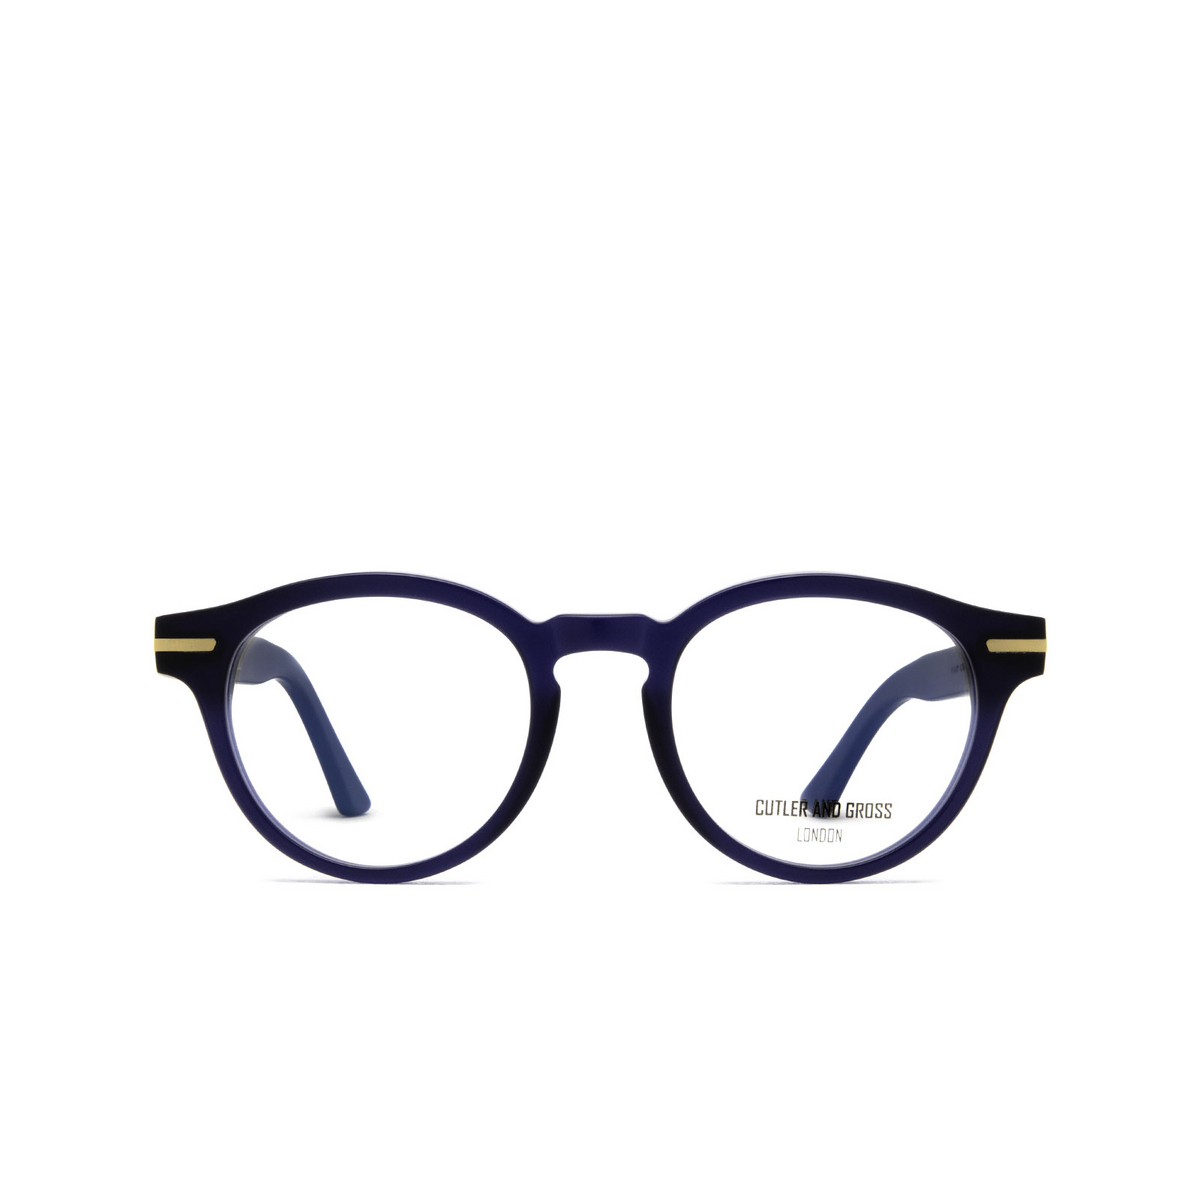 Cutler and Gross® Round Eyeglasses: 1338 color Classic Navy Blue 03 - front view.